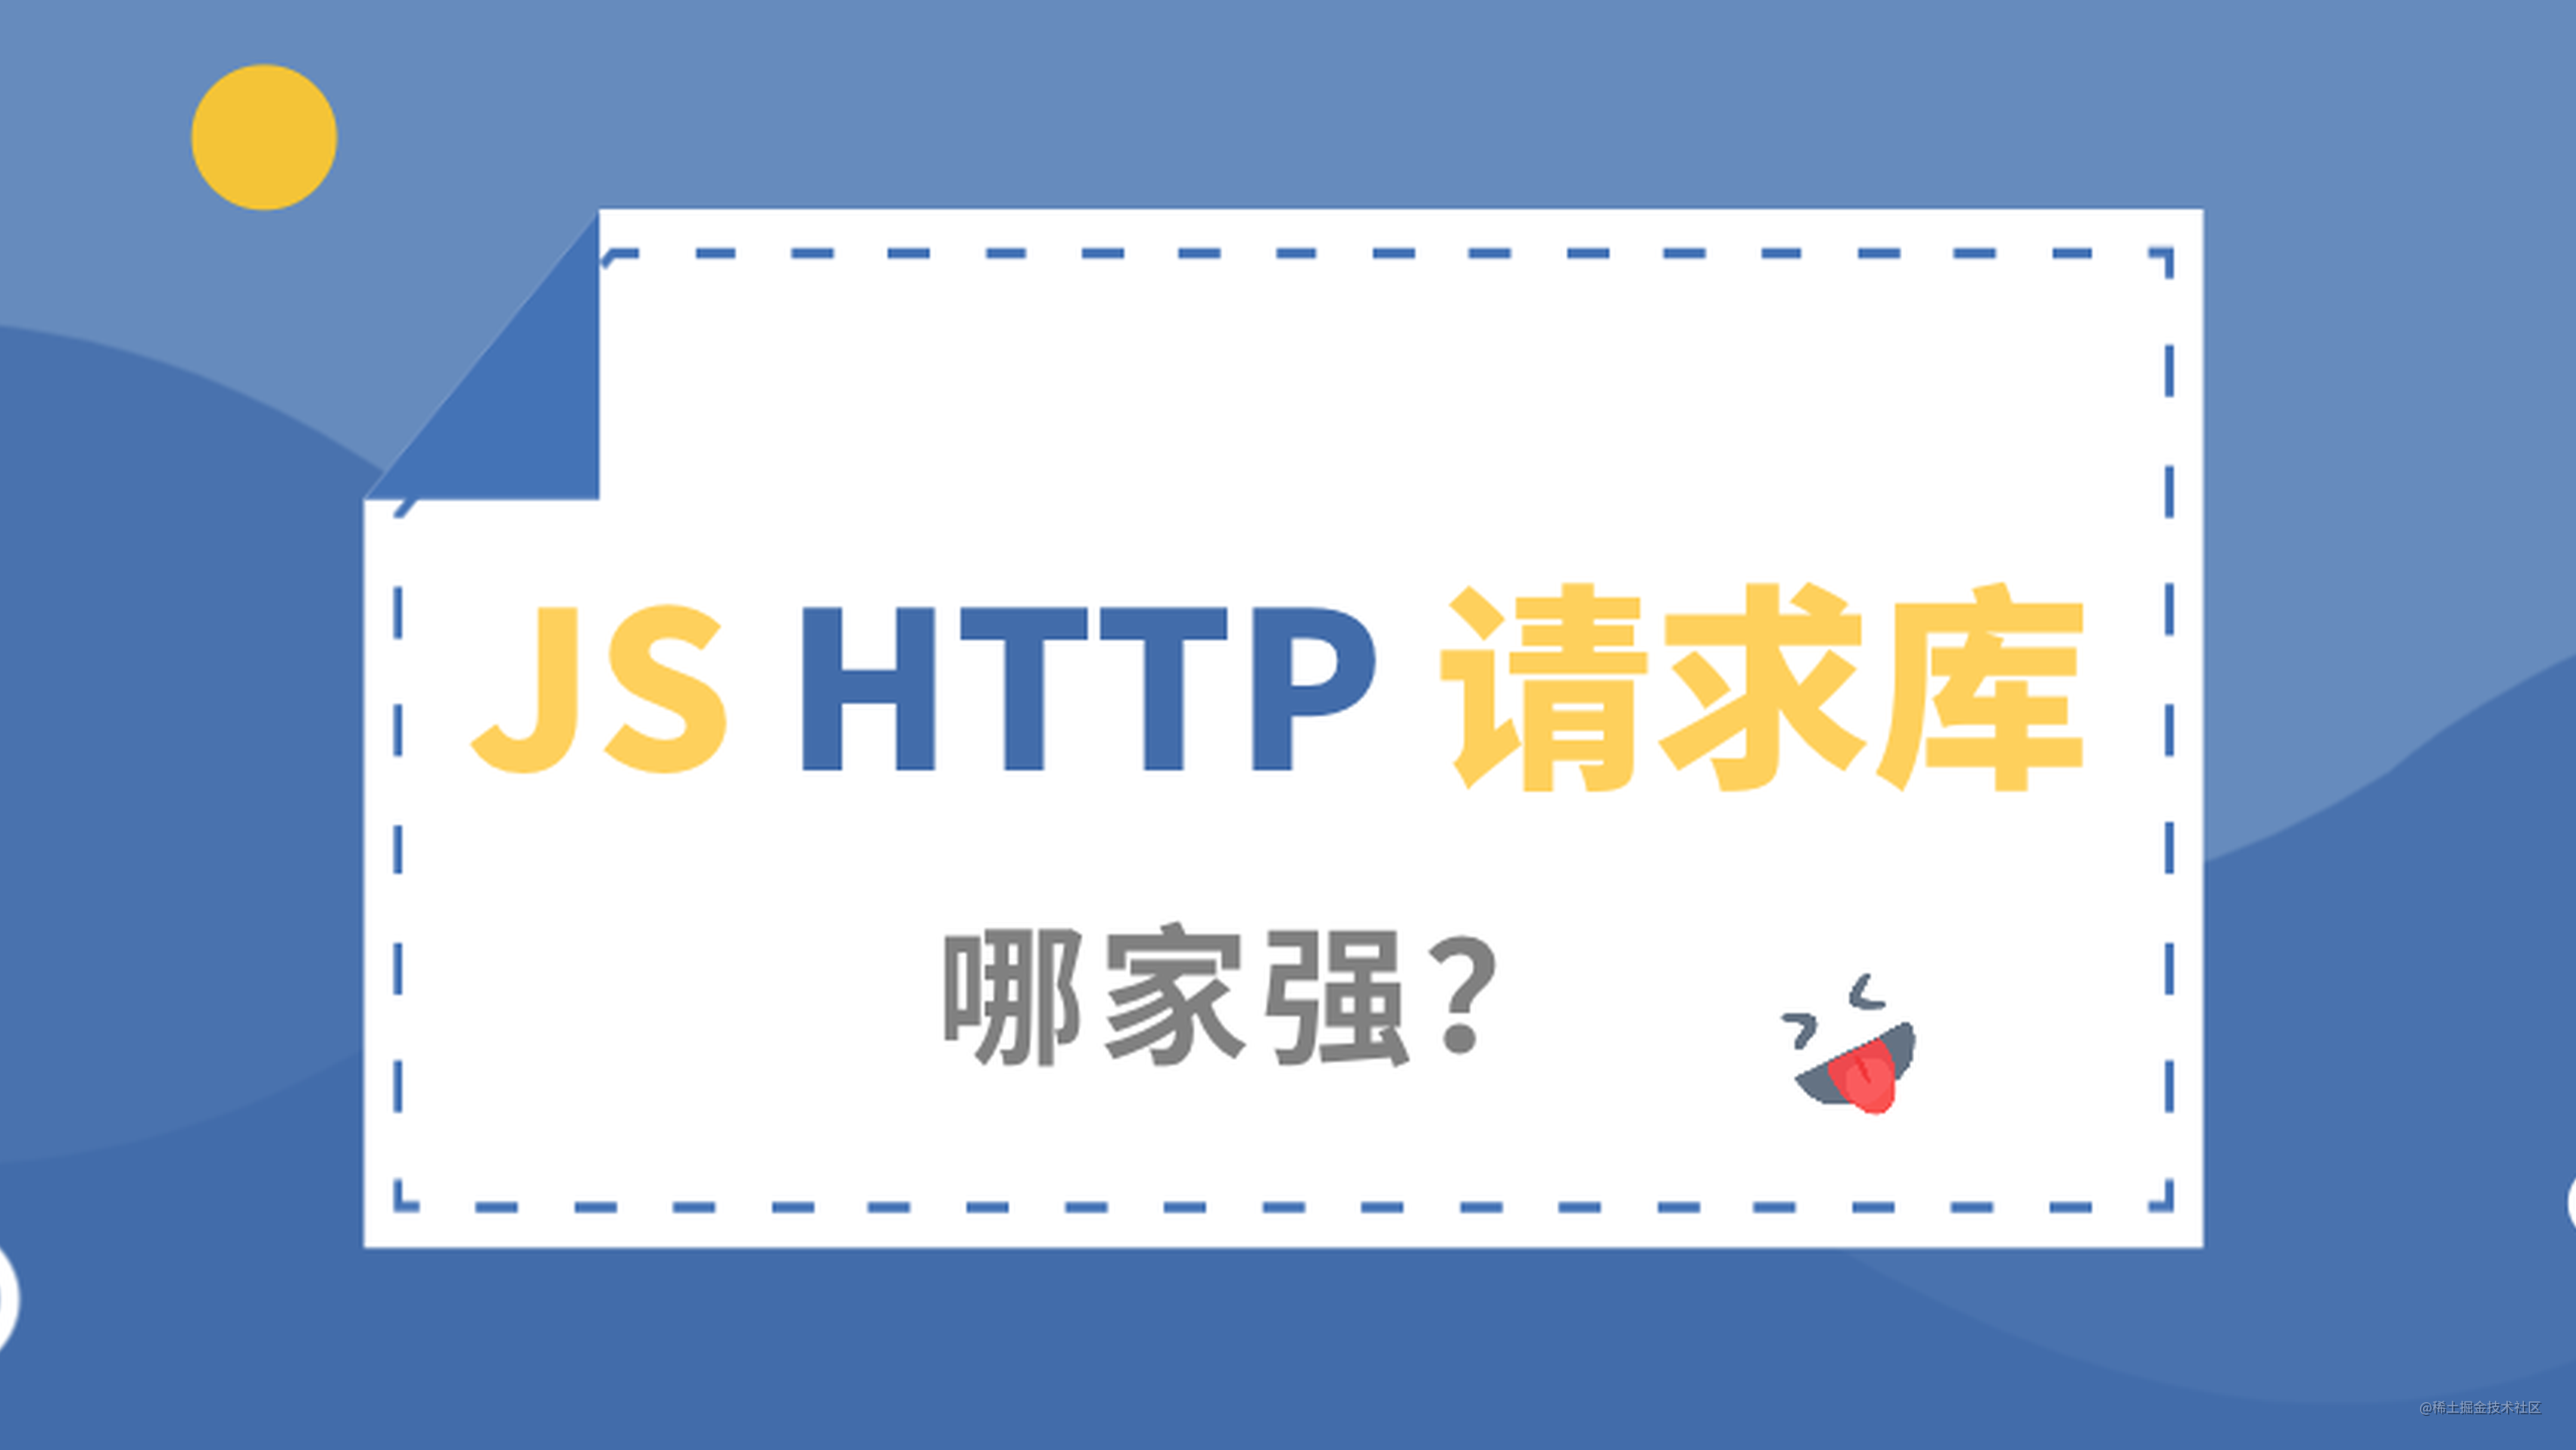 JS HTTP 请求库哪家强？Axios，Request，Superagent，Fetch 还是 Supertest